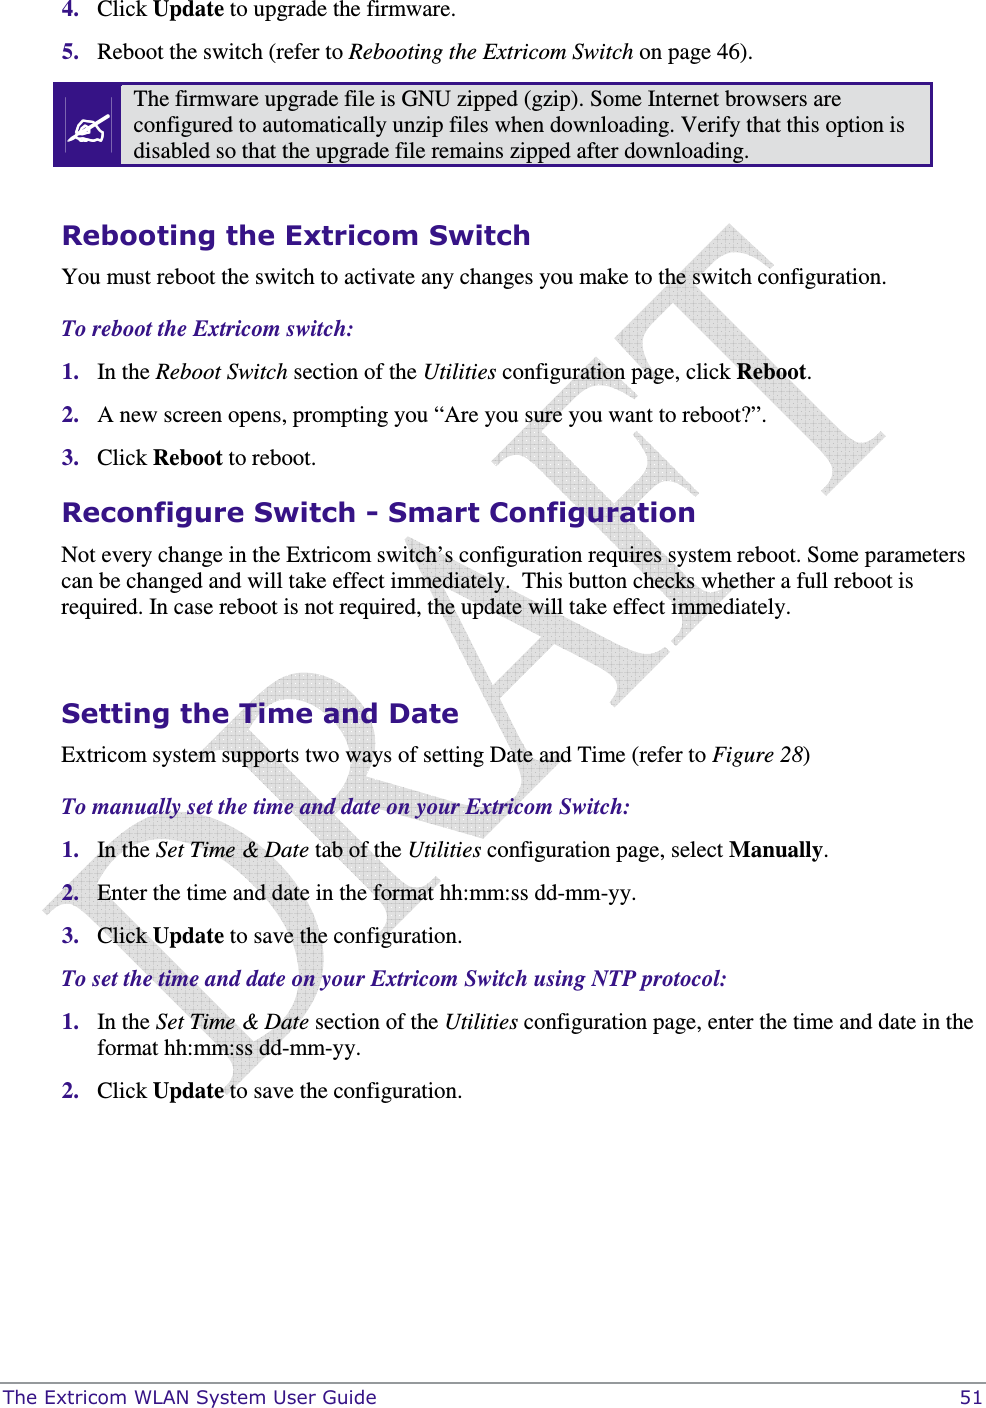  The Extricom WLAN System User Guide    51 4. Click Update to upgrade the firmware. 5. Reboot the switch (refer to Rebooting the Extricom Switch on page 46).  The firmware upgrade file is GNU zipped (gzip). Some Internet browsers are configured to automatically unzip files when downloading. Verify that this option is disabled so that the upgrade file remains zipped after downloading.  Rebooting the Extricom Switch You must reboot the switch to activate any changes you make to the switch configuration. To reboot the Extricom switch: 1. In the Reboot Switch section of the Utilities configuration page, click Reboot.  2. A new screen opens, prompting you “Are you sure you want to reboot?”.  3. Click Reboot to reboot.  Reconfigure Switch - Smart Configuration Not every change in the Extricom switch’s configuration requires system reboot. Some parameters can be changed and will take effect immediately.  This button checks whether a full reboot is required. In case reboot is not required, the update will take effect immediately.  Setting the Time and Date Extricom system supports two ways of setting Date and Time (refer to Figure 28) To manually set the time and date on your Extricom Switch: 1. In the Set Time &amp; Date tab of the Utilities configuration page, select Manually.  2. Enter the time and date in the format hh:mm:ss dd-mm-yy. 3. Click Update to save the configuration. To set the time and date on your Extricom Switch using NTP protocol: 1. In the Set Time &amp; Date section of the Utilities configuration page, enter the time and date in the format hh:mm:ss dd-mm-yy. 2. Click Update to save the configuration.  